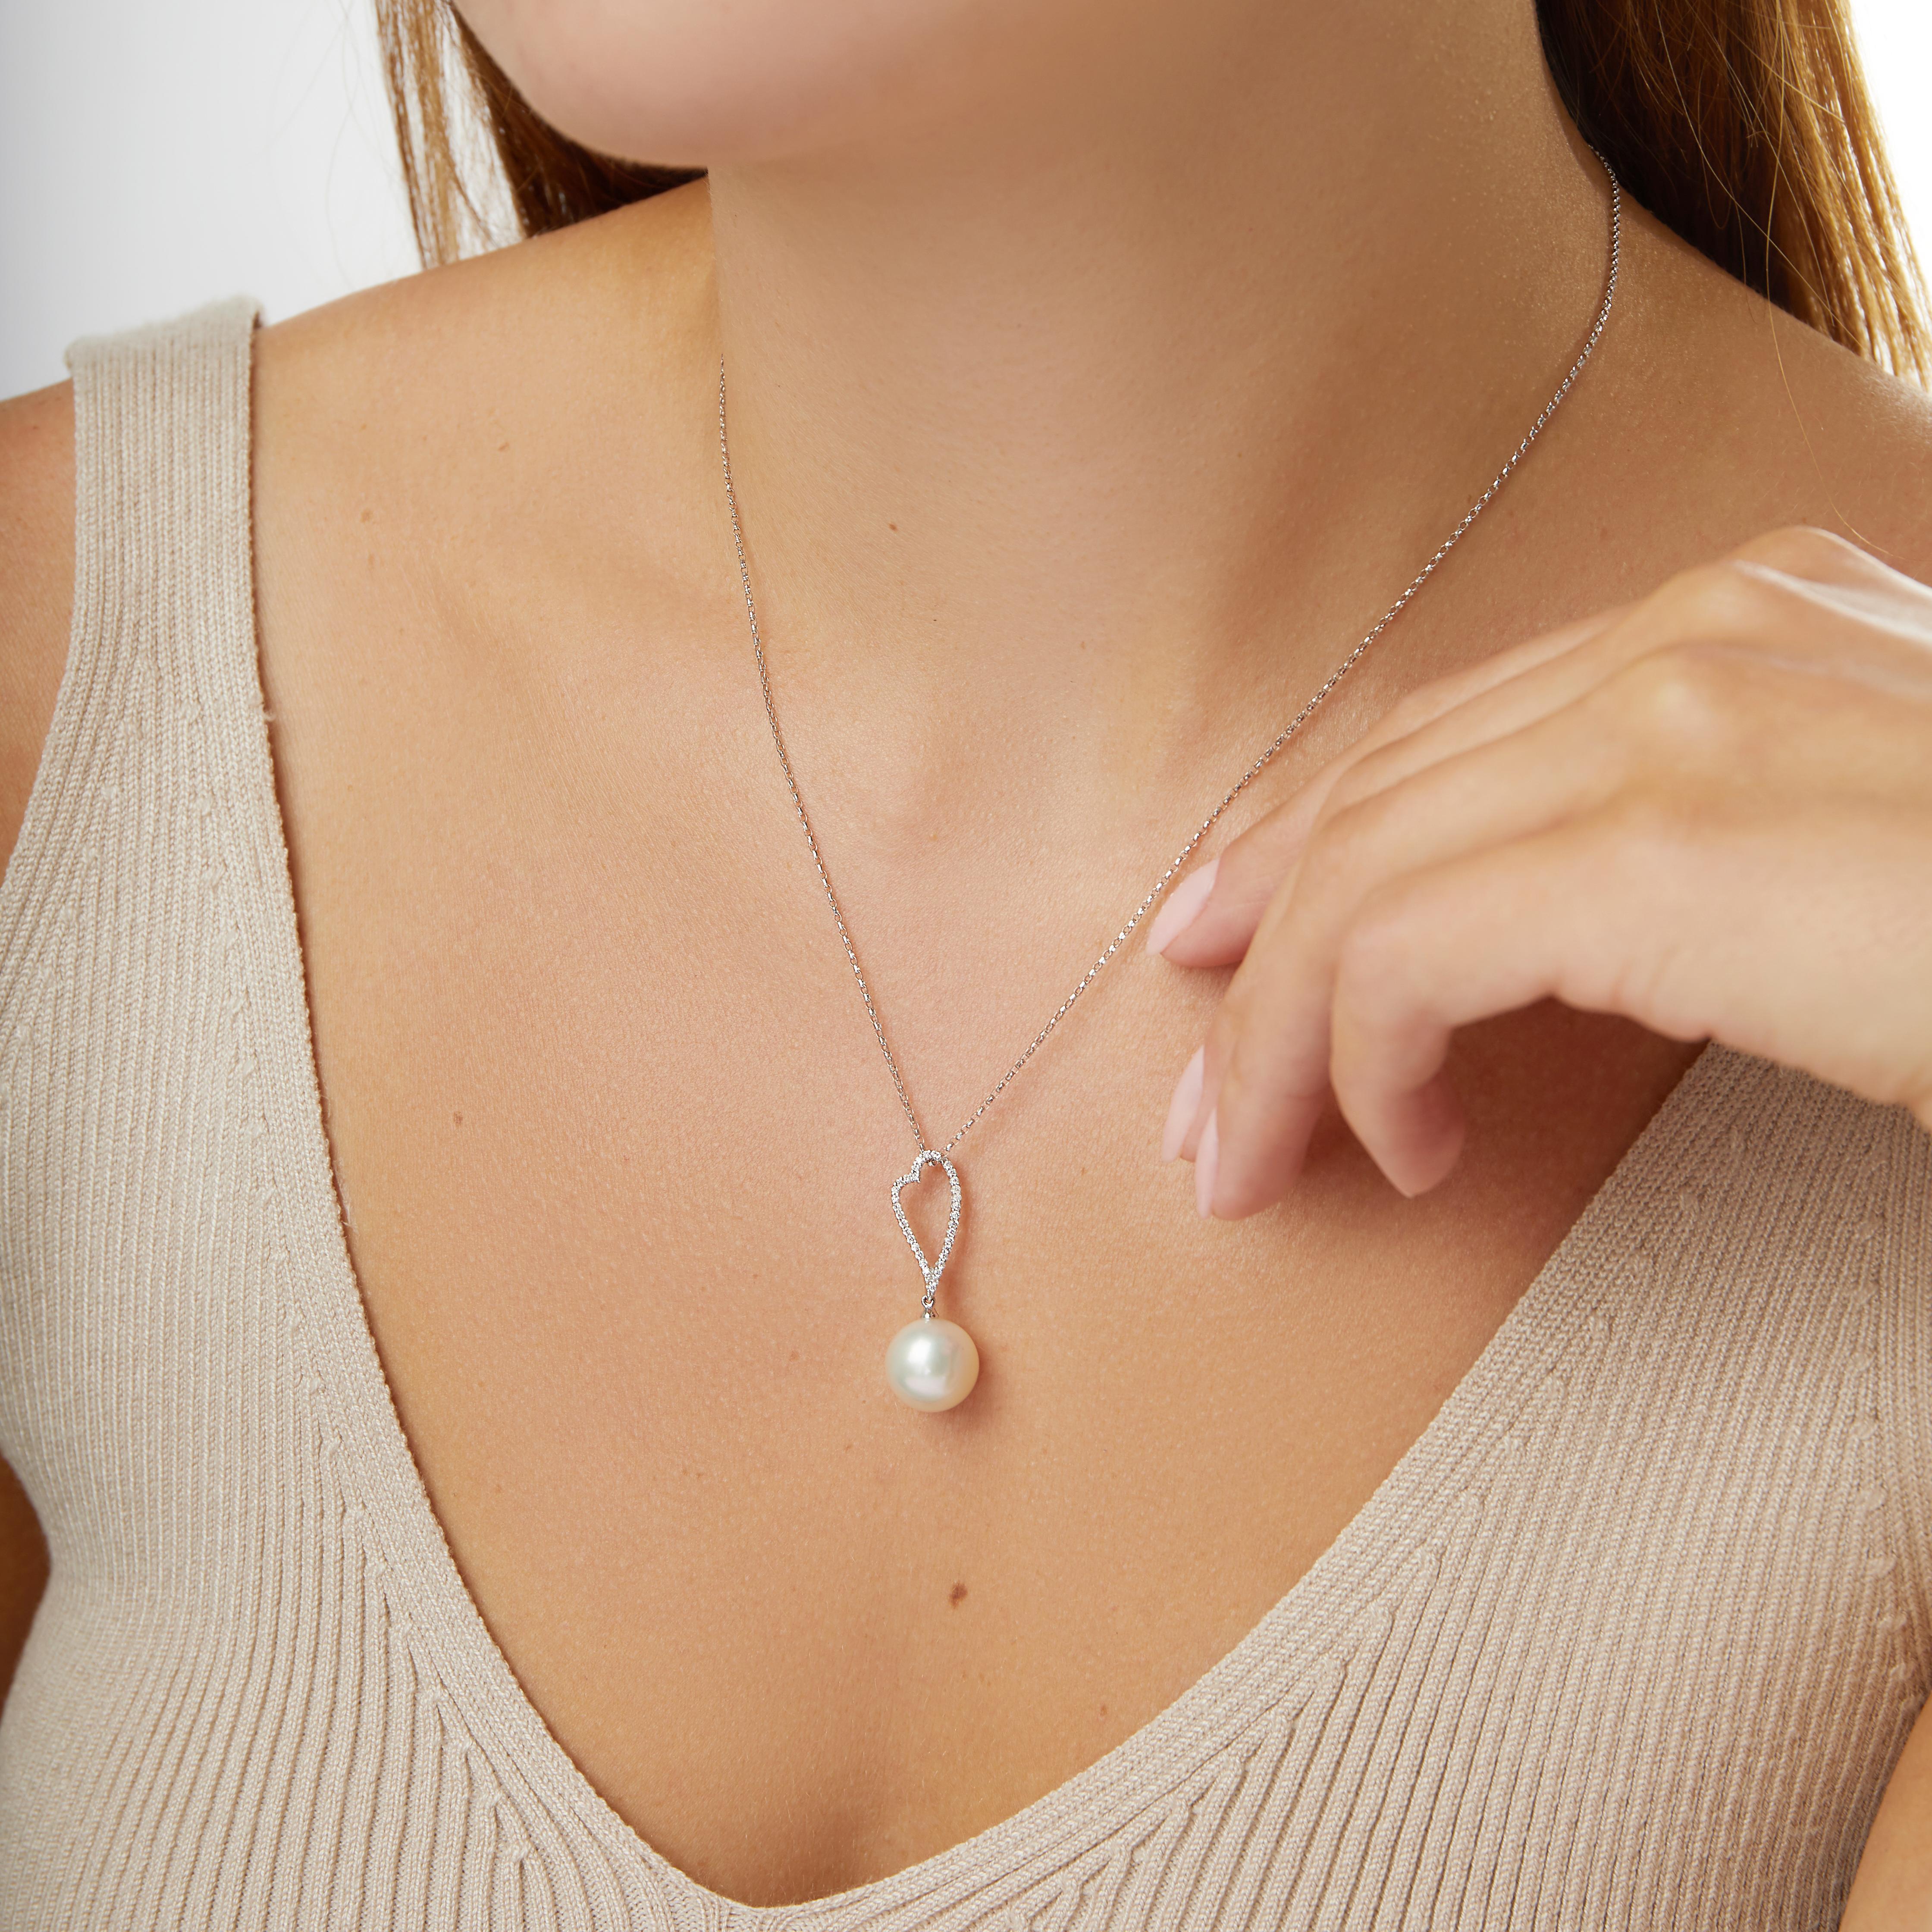 This playful pendant by Yoko London features a lustrous South Sea pearl beneath a diamond heart-motif. Set in 18 Karat white gold to enhance the lustre of the pearl and the sparkle of the diamonds. This beautiful pendant would make a romantic and